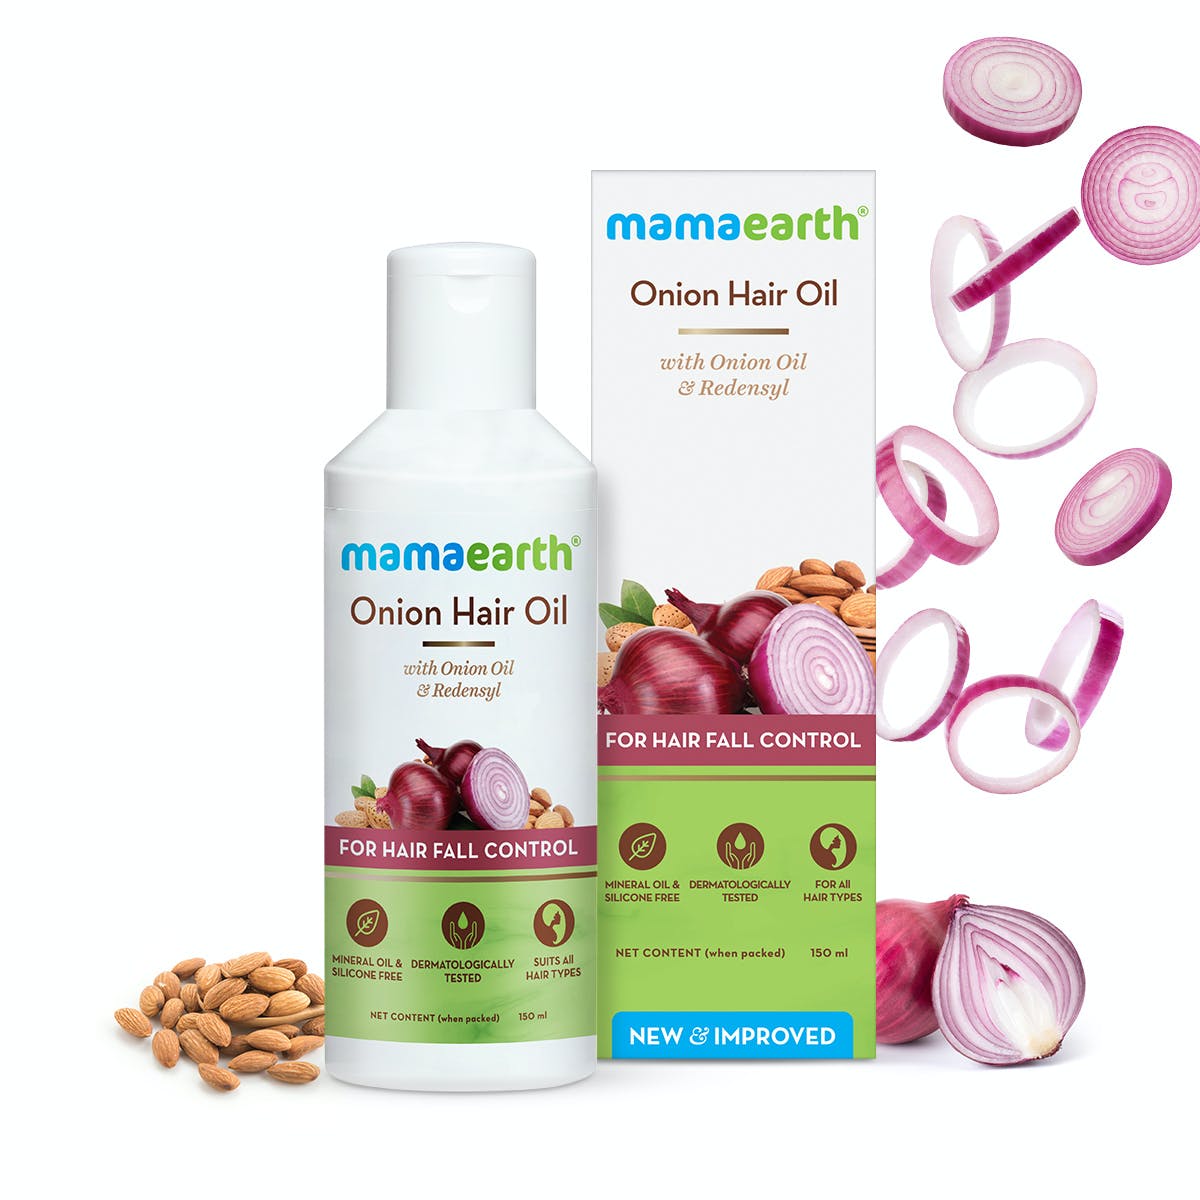 mamaearth’
Onion Hair Oil

with Onion Oil
& Redensyl

 

'
mamaearth’
Onion Hair Oil -

with Onion Oil
& Redensyl

NEW & IMPROVED